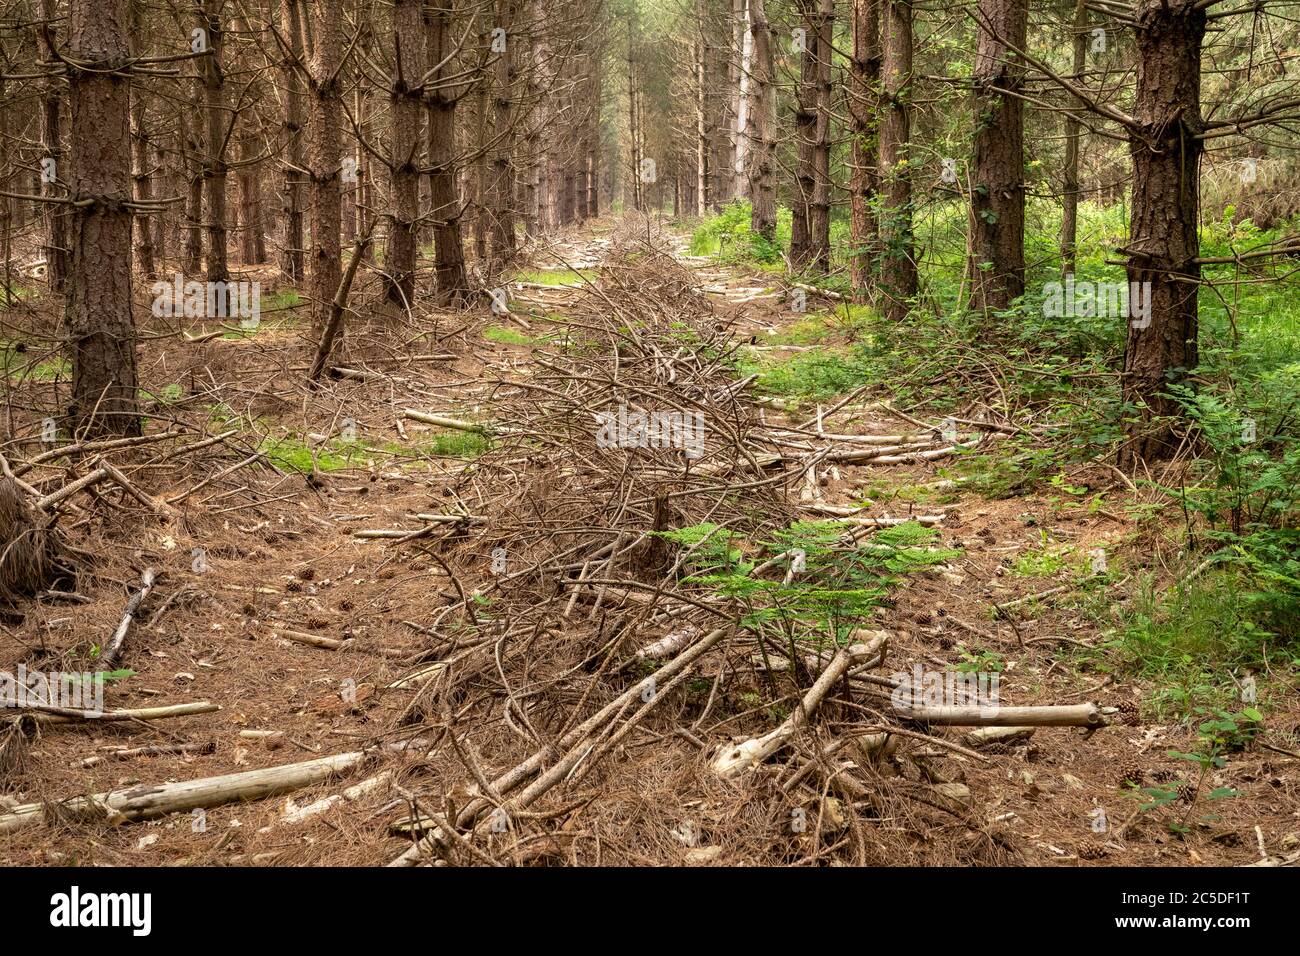 An symmetrical avenue between 2 rows of planted pine trees filled with heaped small branches diminishing into the distance. Stock Photo